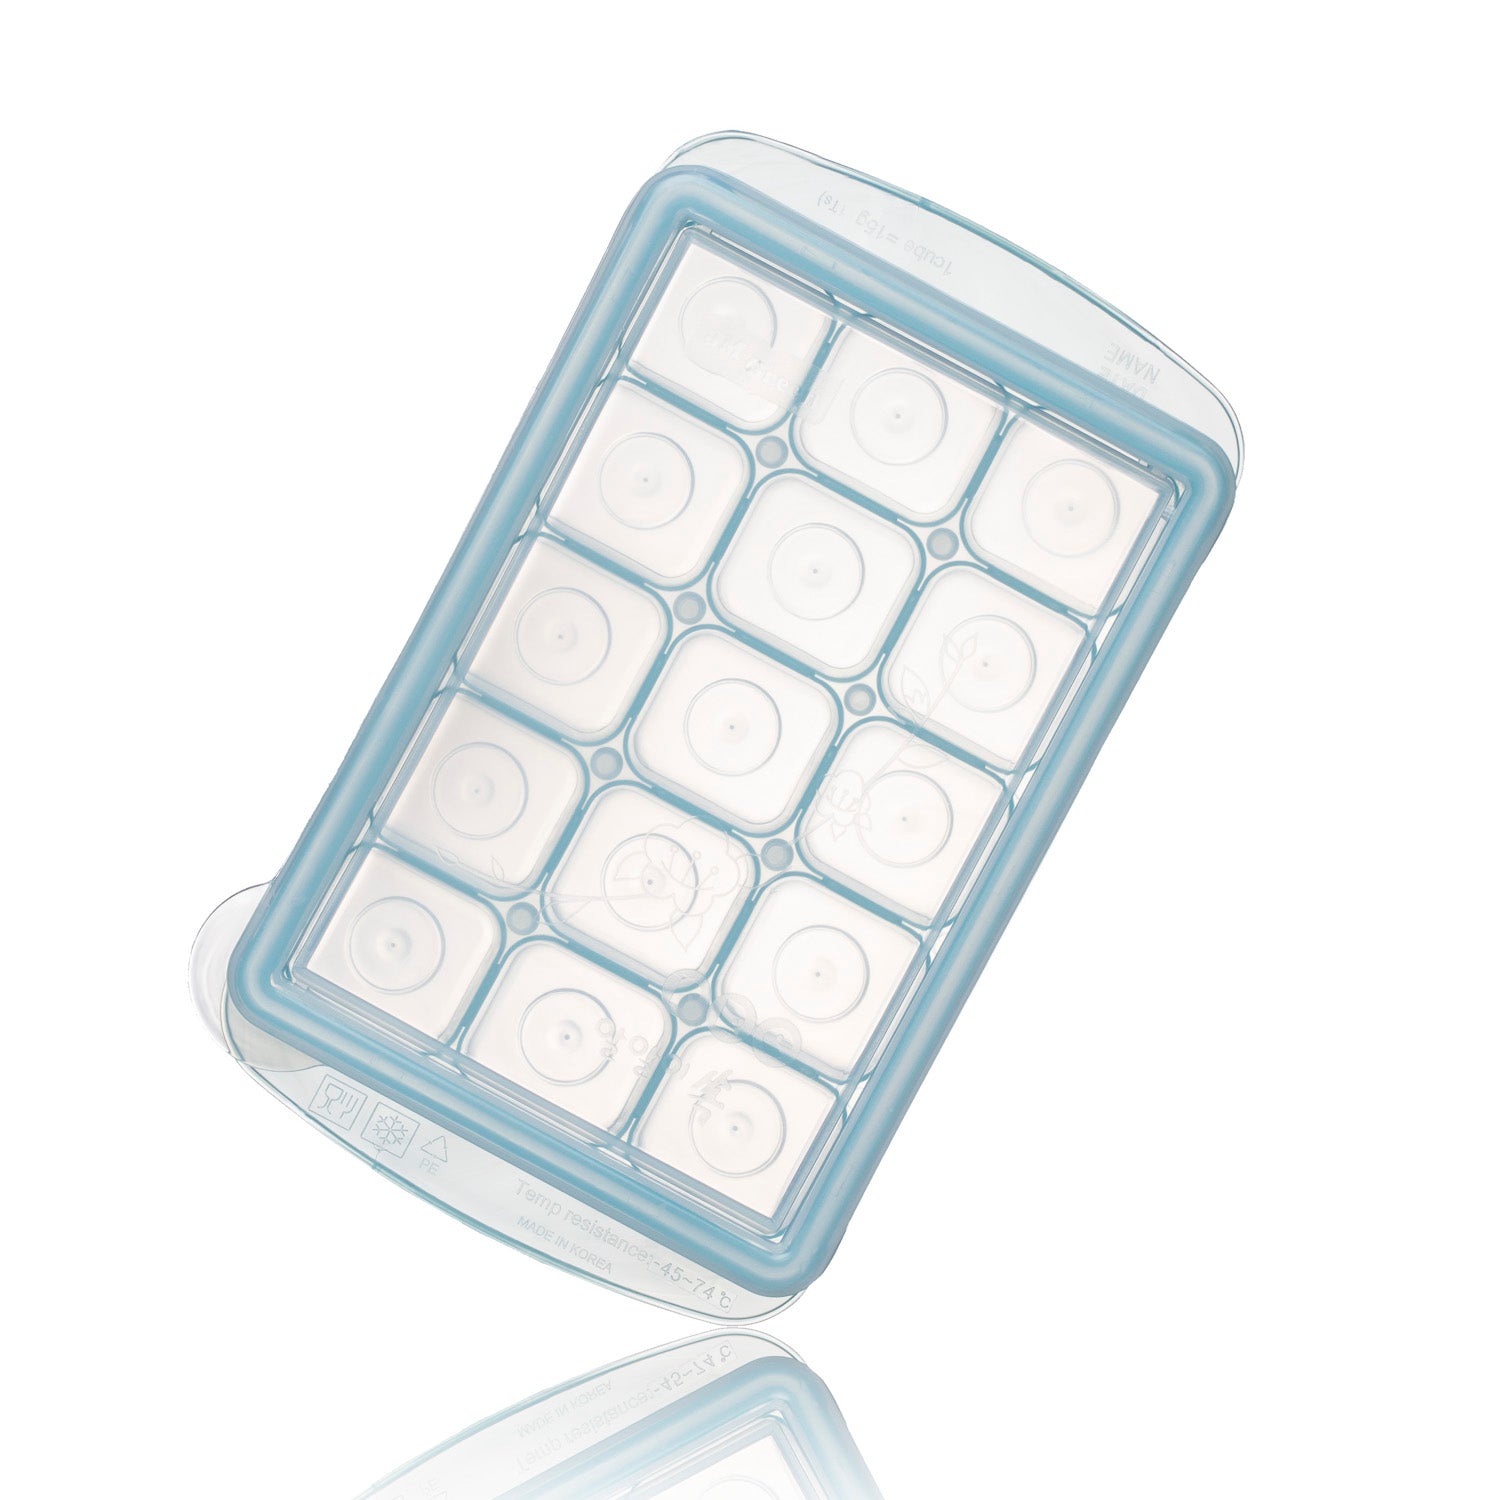 Easily Pop Out 15 Compartments Tray with Lid Clear